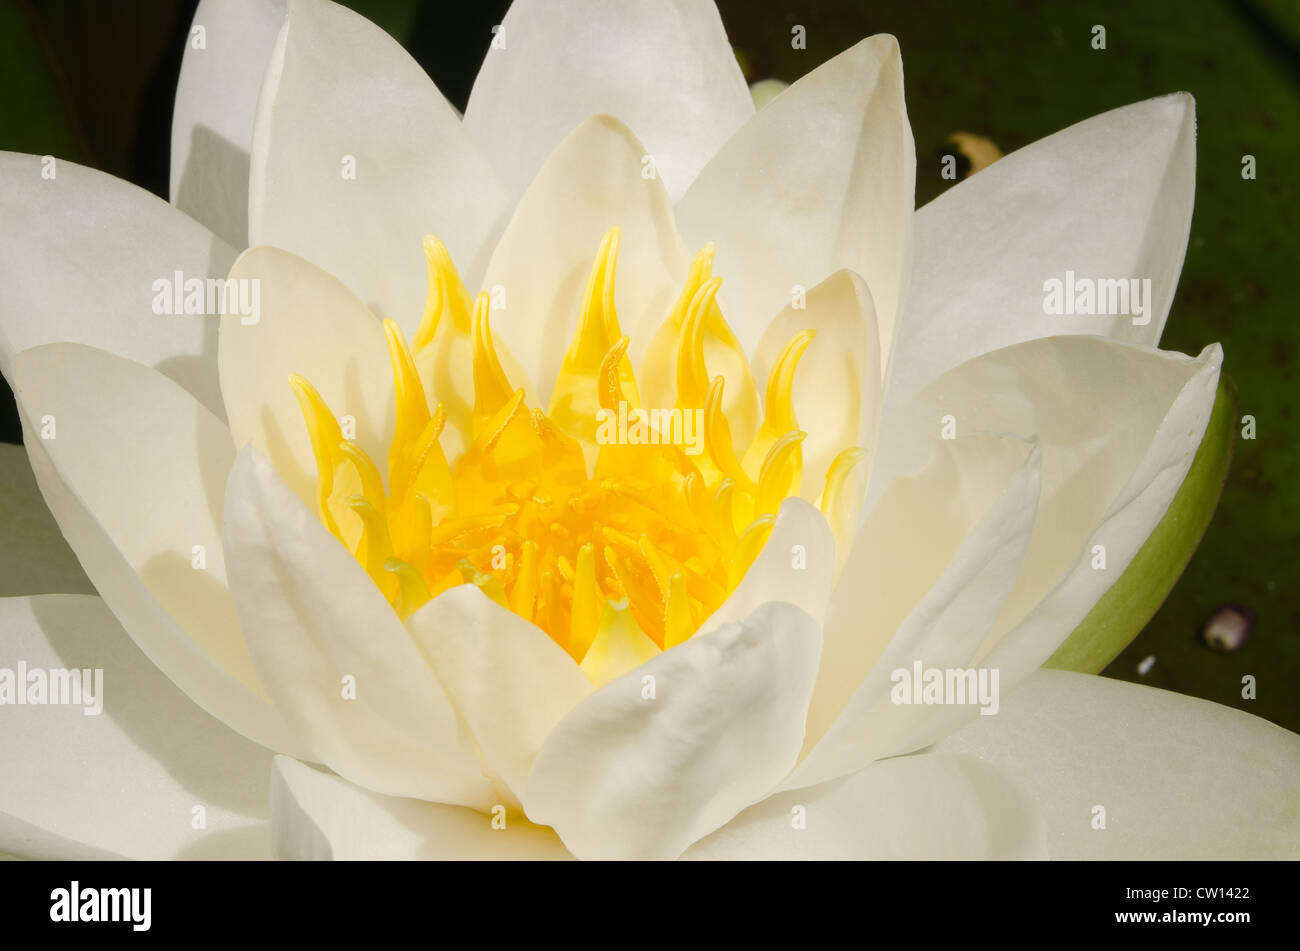 detail of white water lily flower Nymphaea alba showing anther and stamen Stock Photo